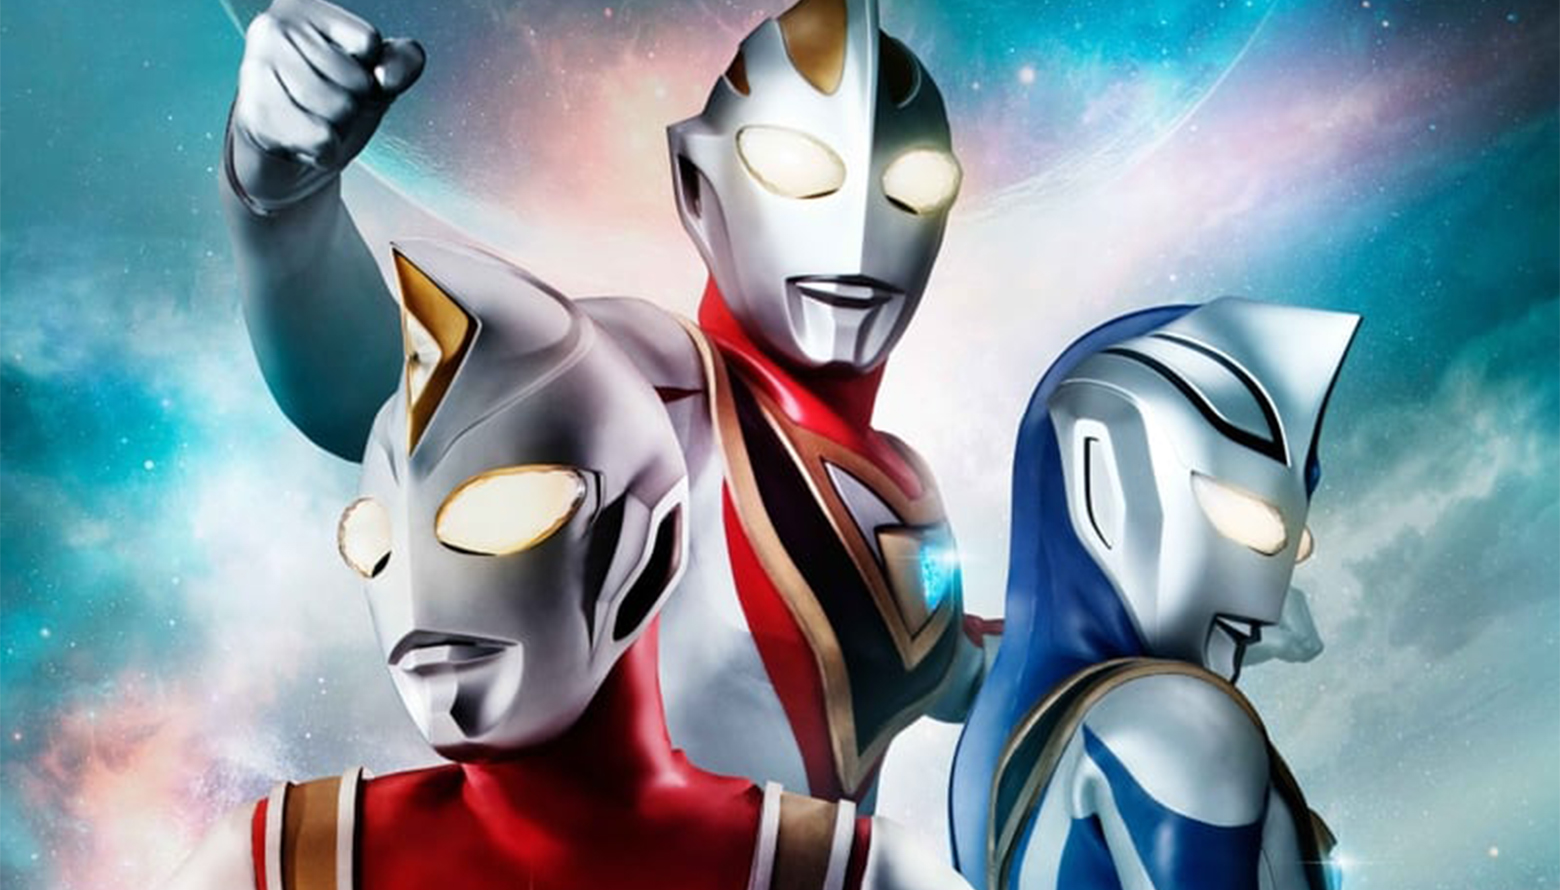 TICKETS NOW ON SALE FOR ULTRAMAN CONNECTION LIVE FEATURING DYNA & GAIA VIRTUAL EVENT